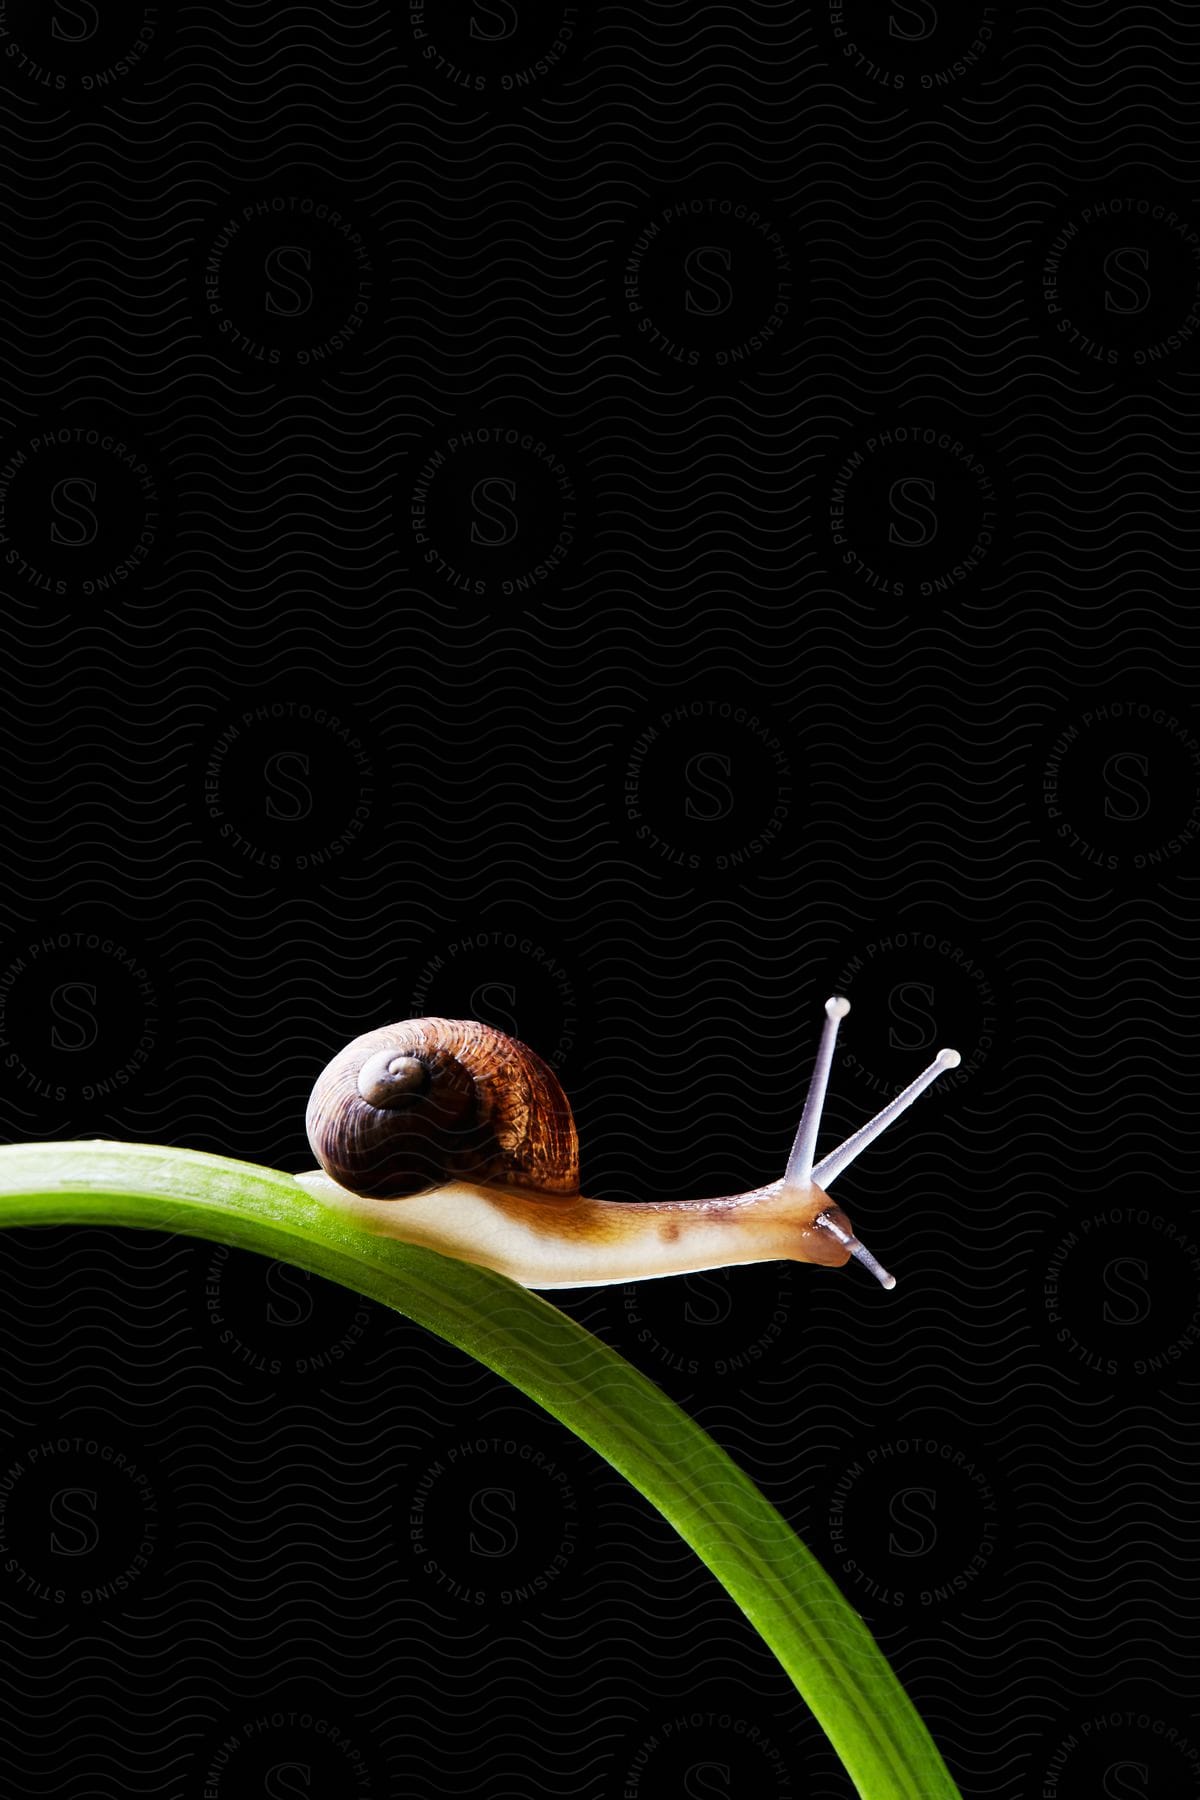 A snail crawling on a green blade of grass against a black background.